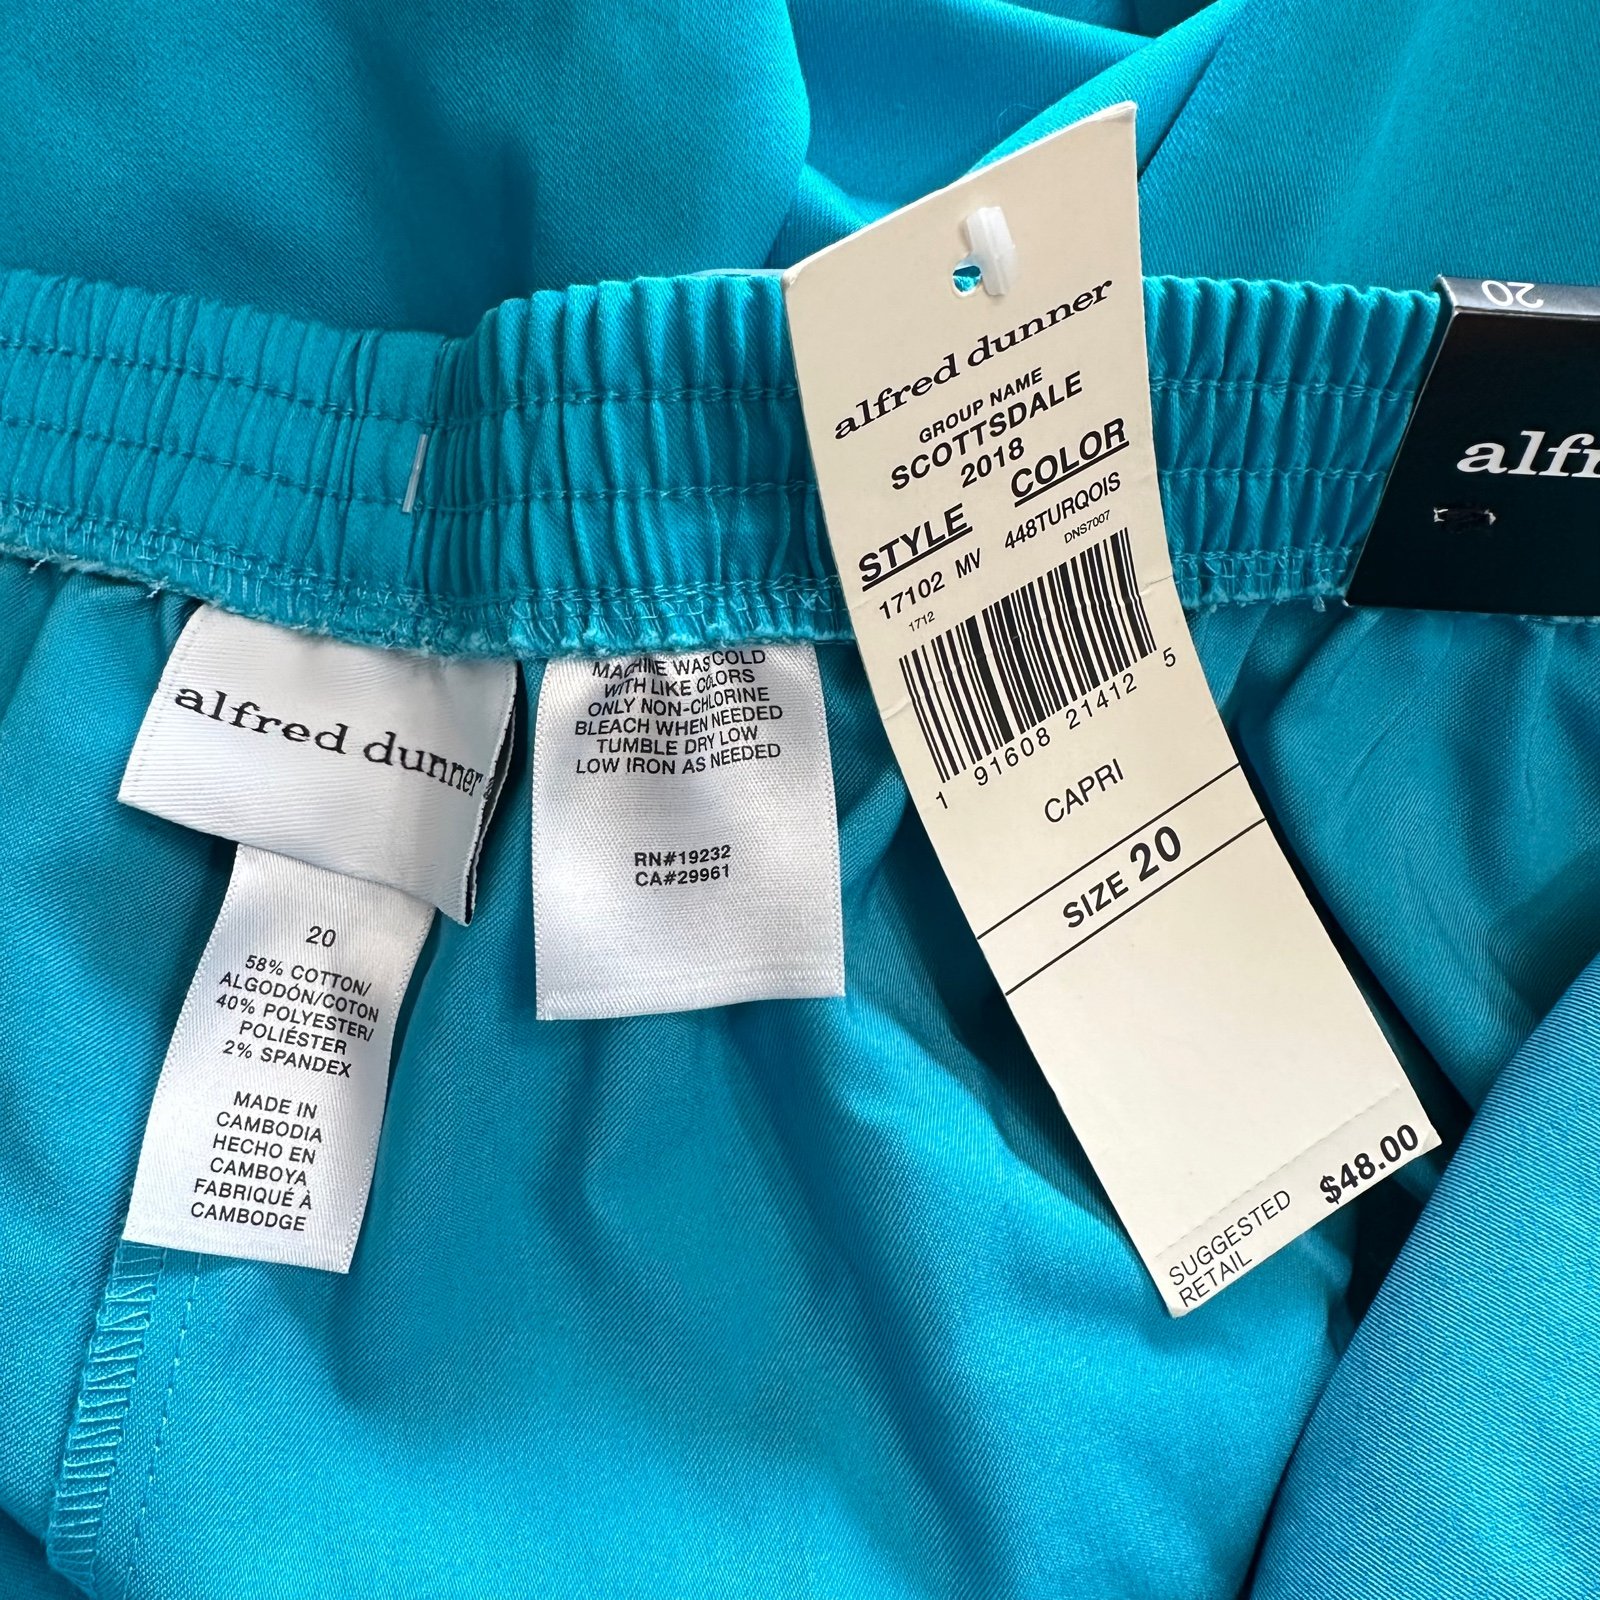 Comfortable Alfred Dunner 20 plus size pull on teal blue capris with pockets JFYhq0TJH Fashion